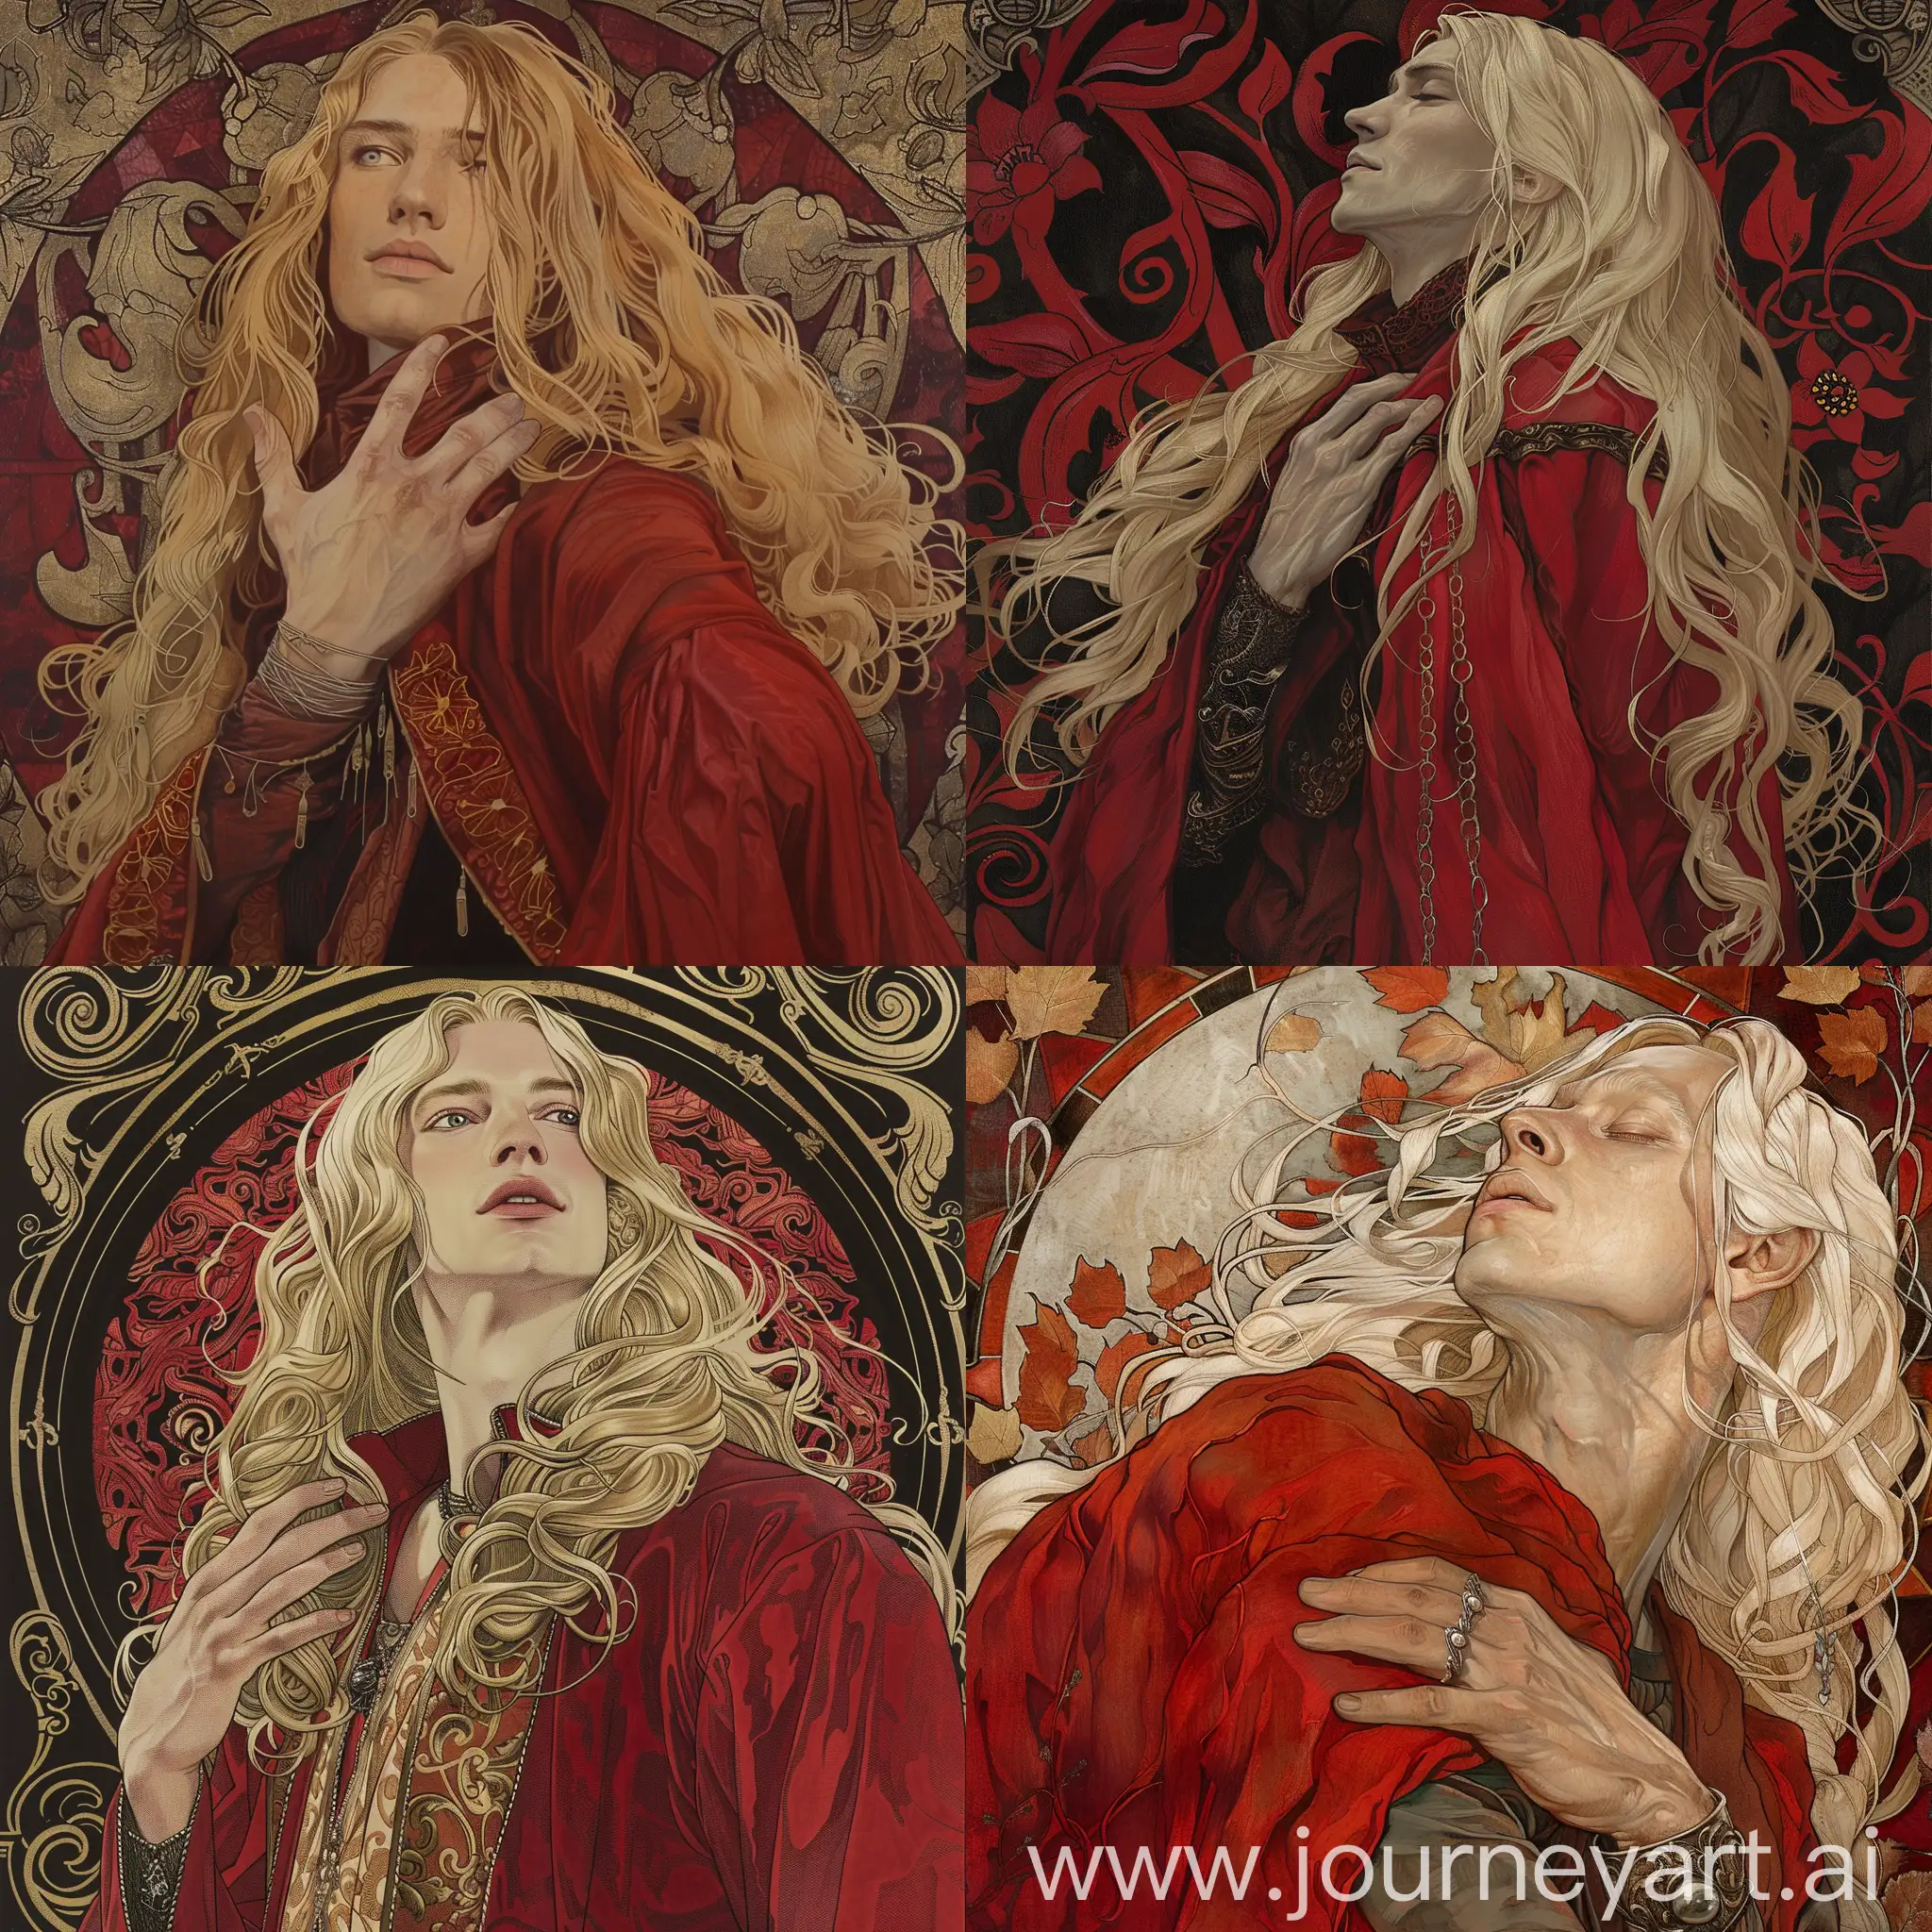 Man with long blonde hair, in the red mantle, silver hand, art nouveau